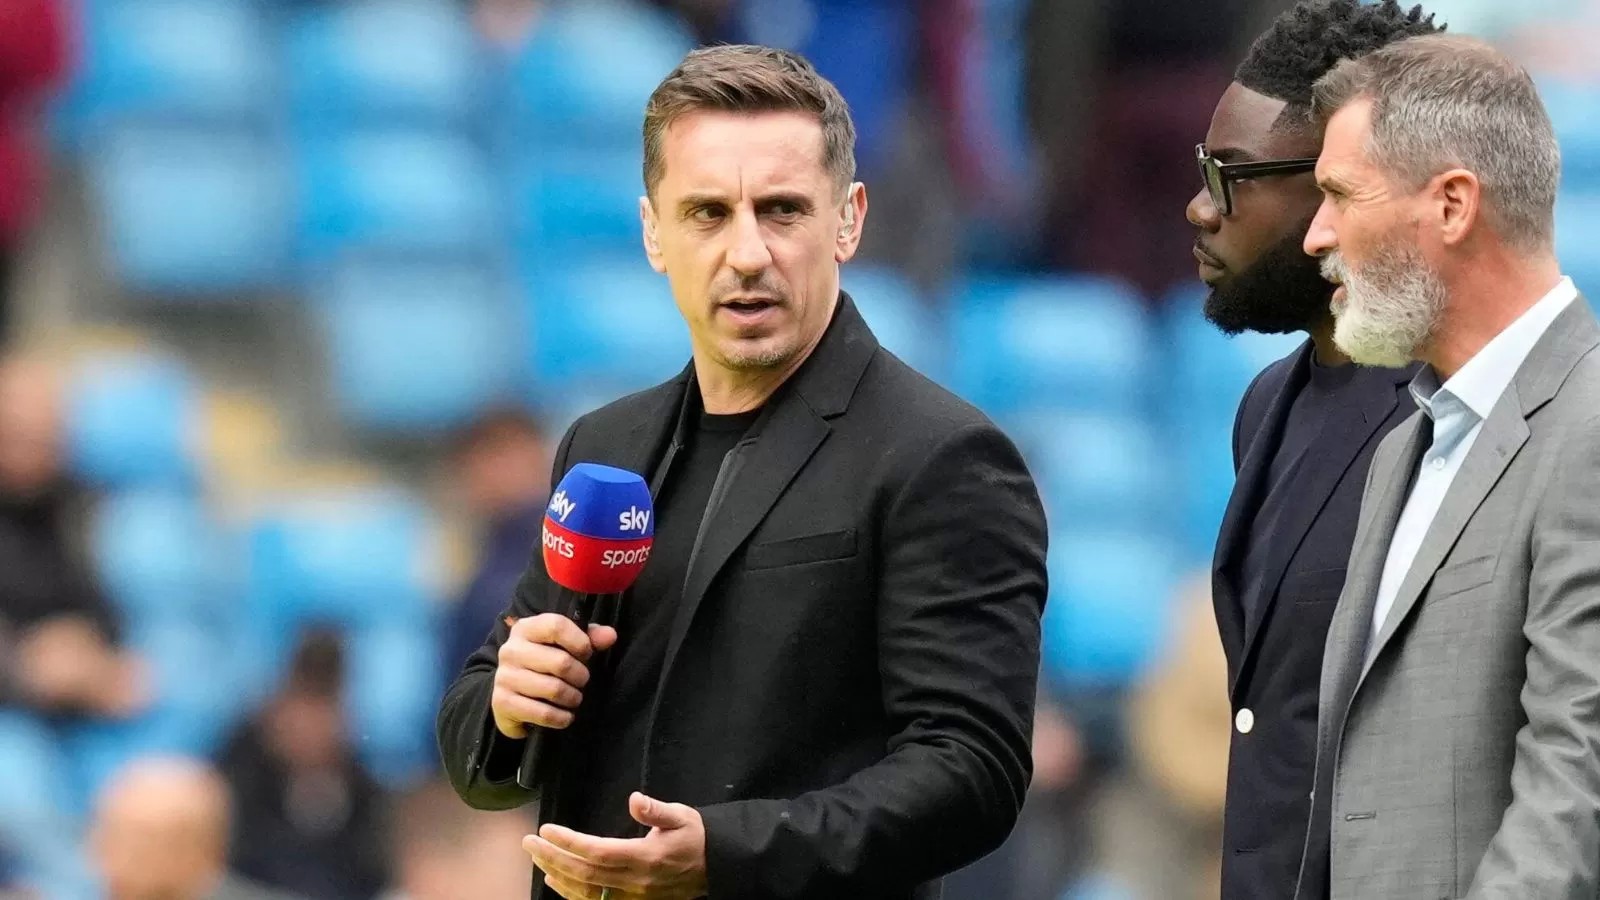 Gary Neville fears ‘sensational’ England star will be ‘mishandled’ like Paul Scholes was